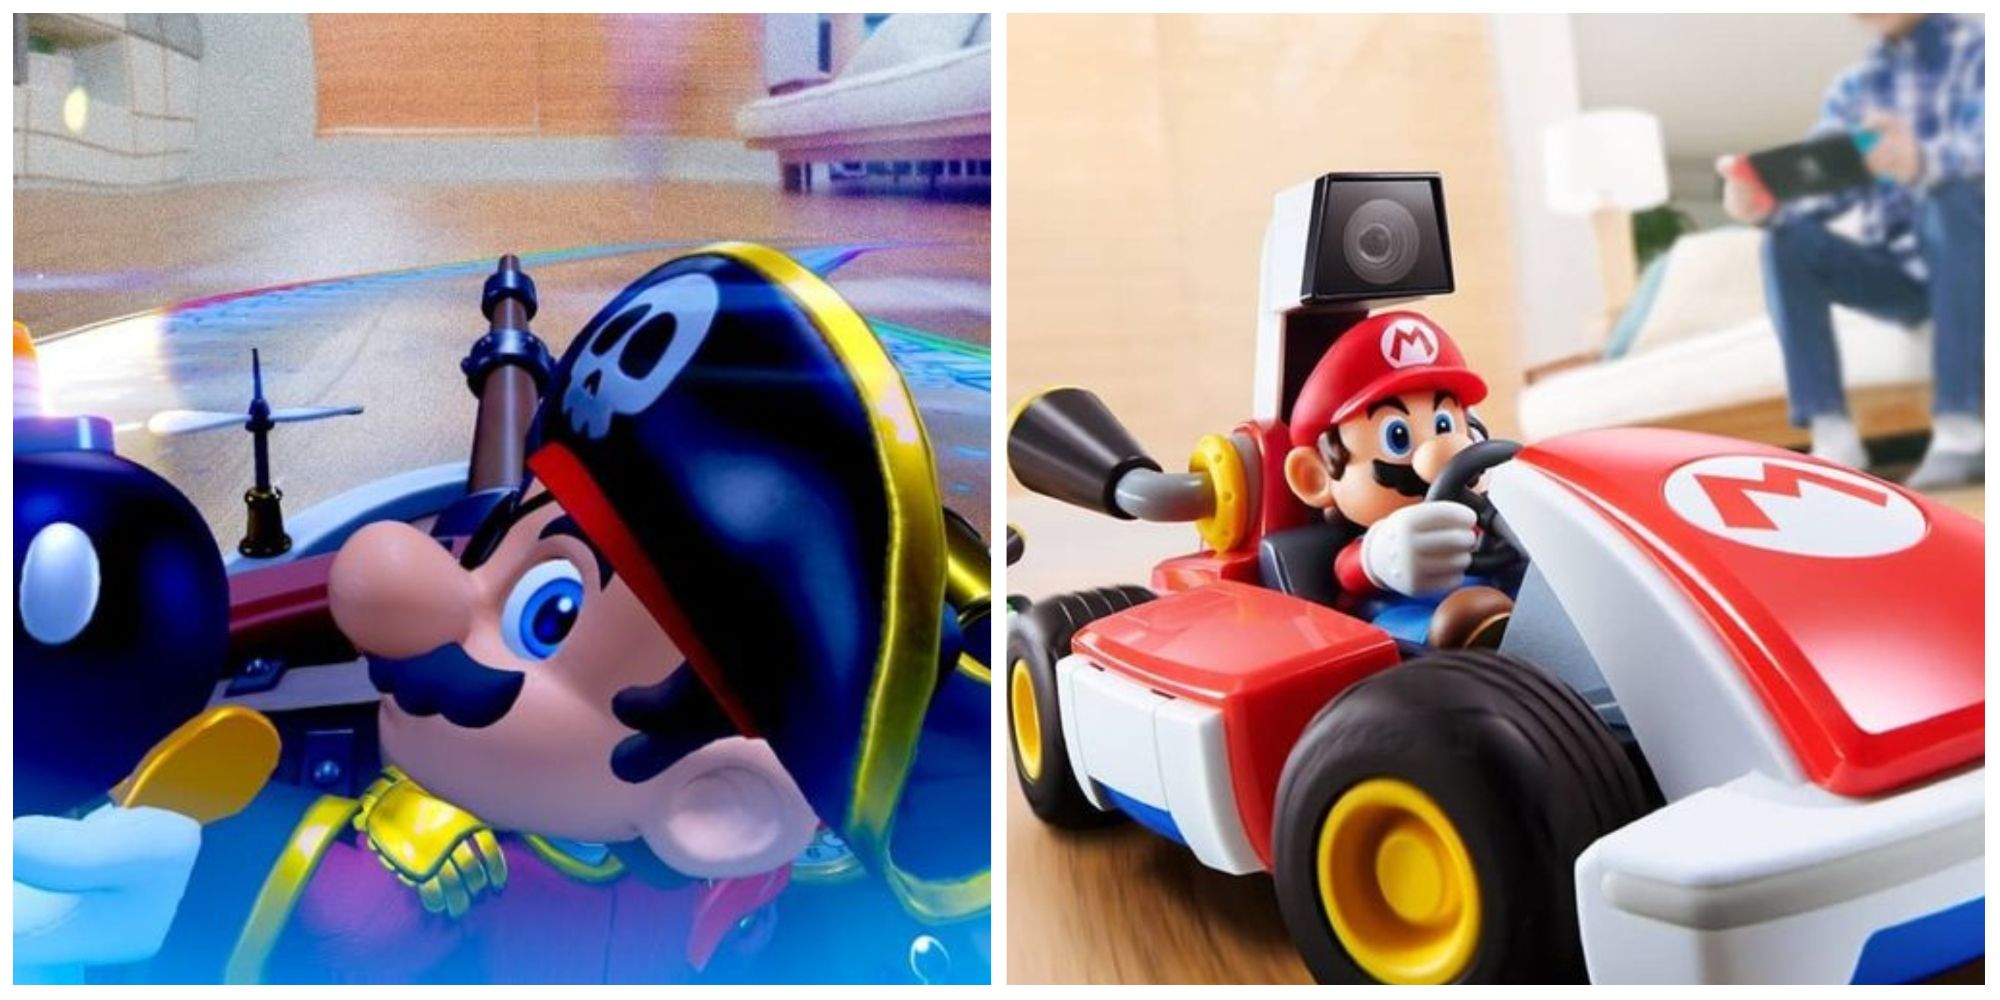 Mario Kart Live: Home Circuit Brings The Series Into The Real